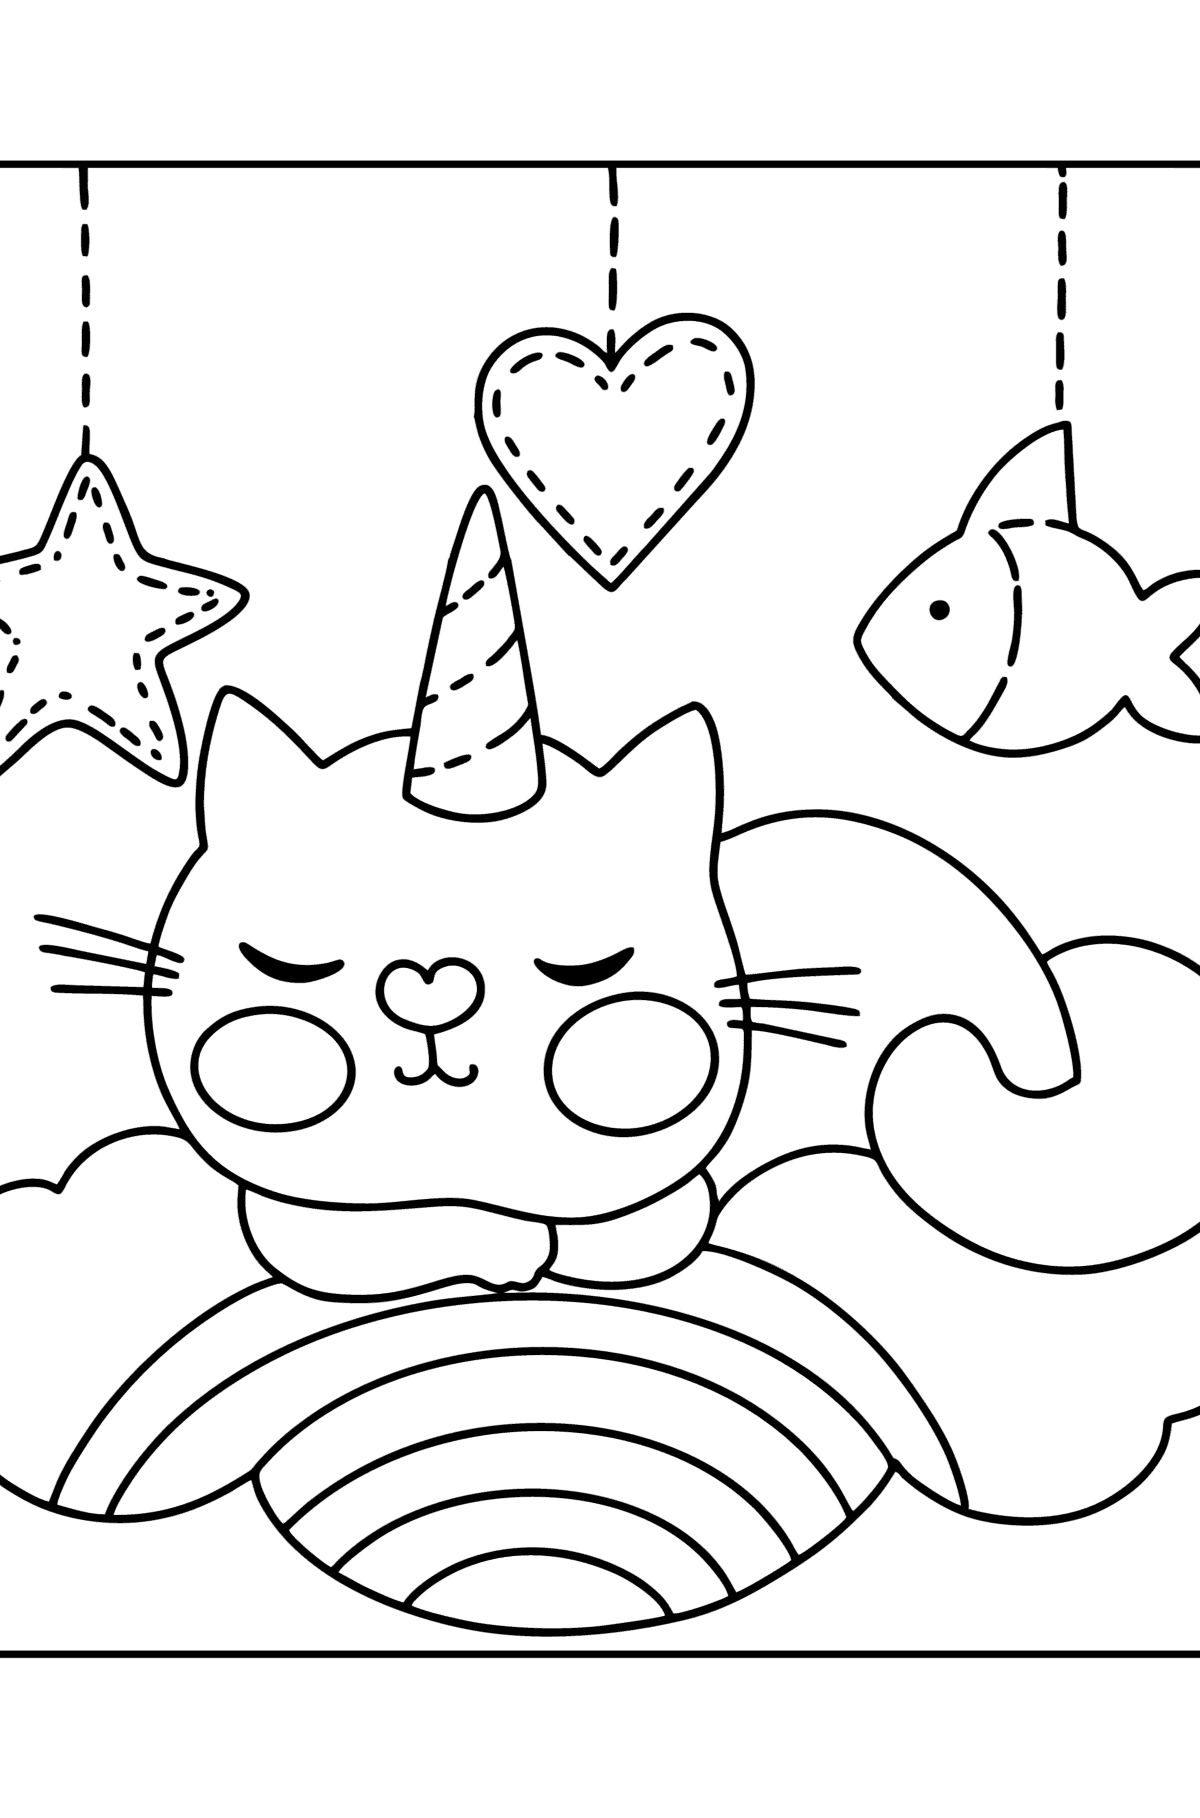 Cute cat unicorn coloring page ♥ Online and Print for Free